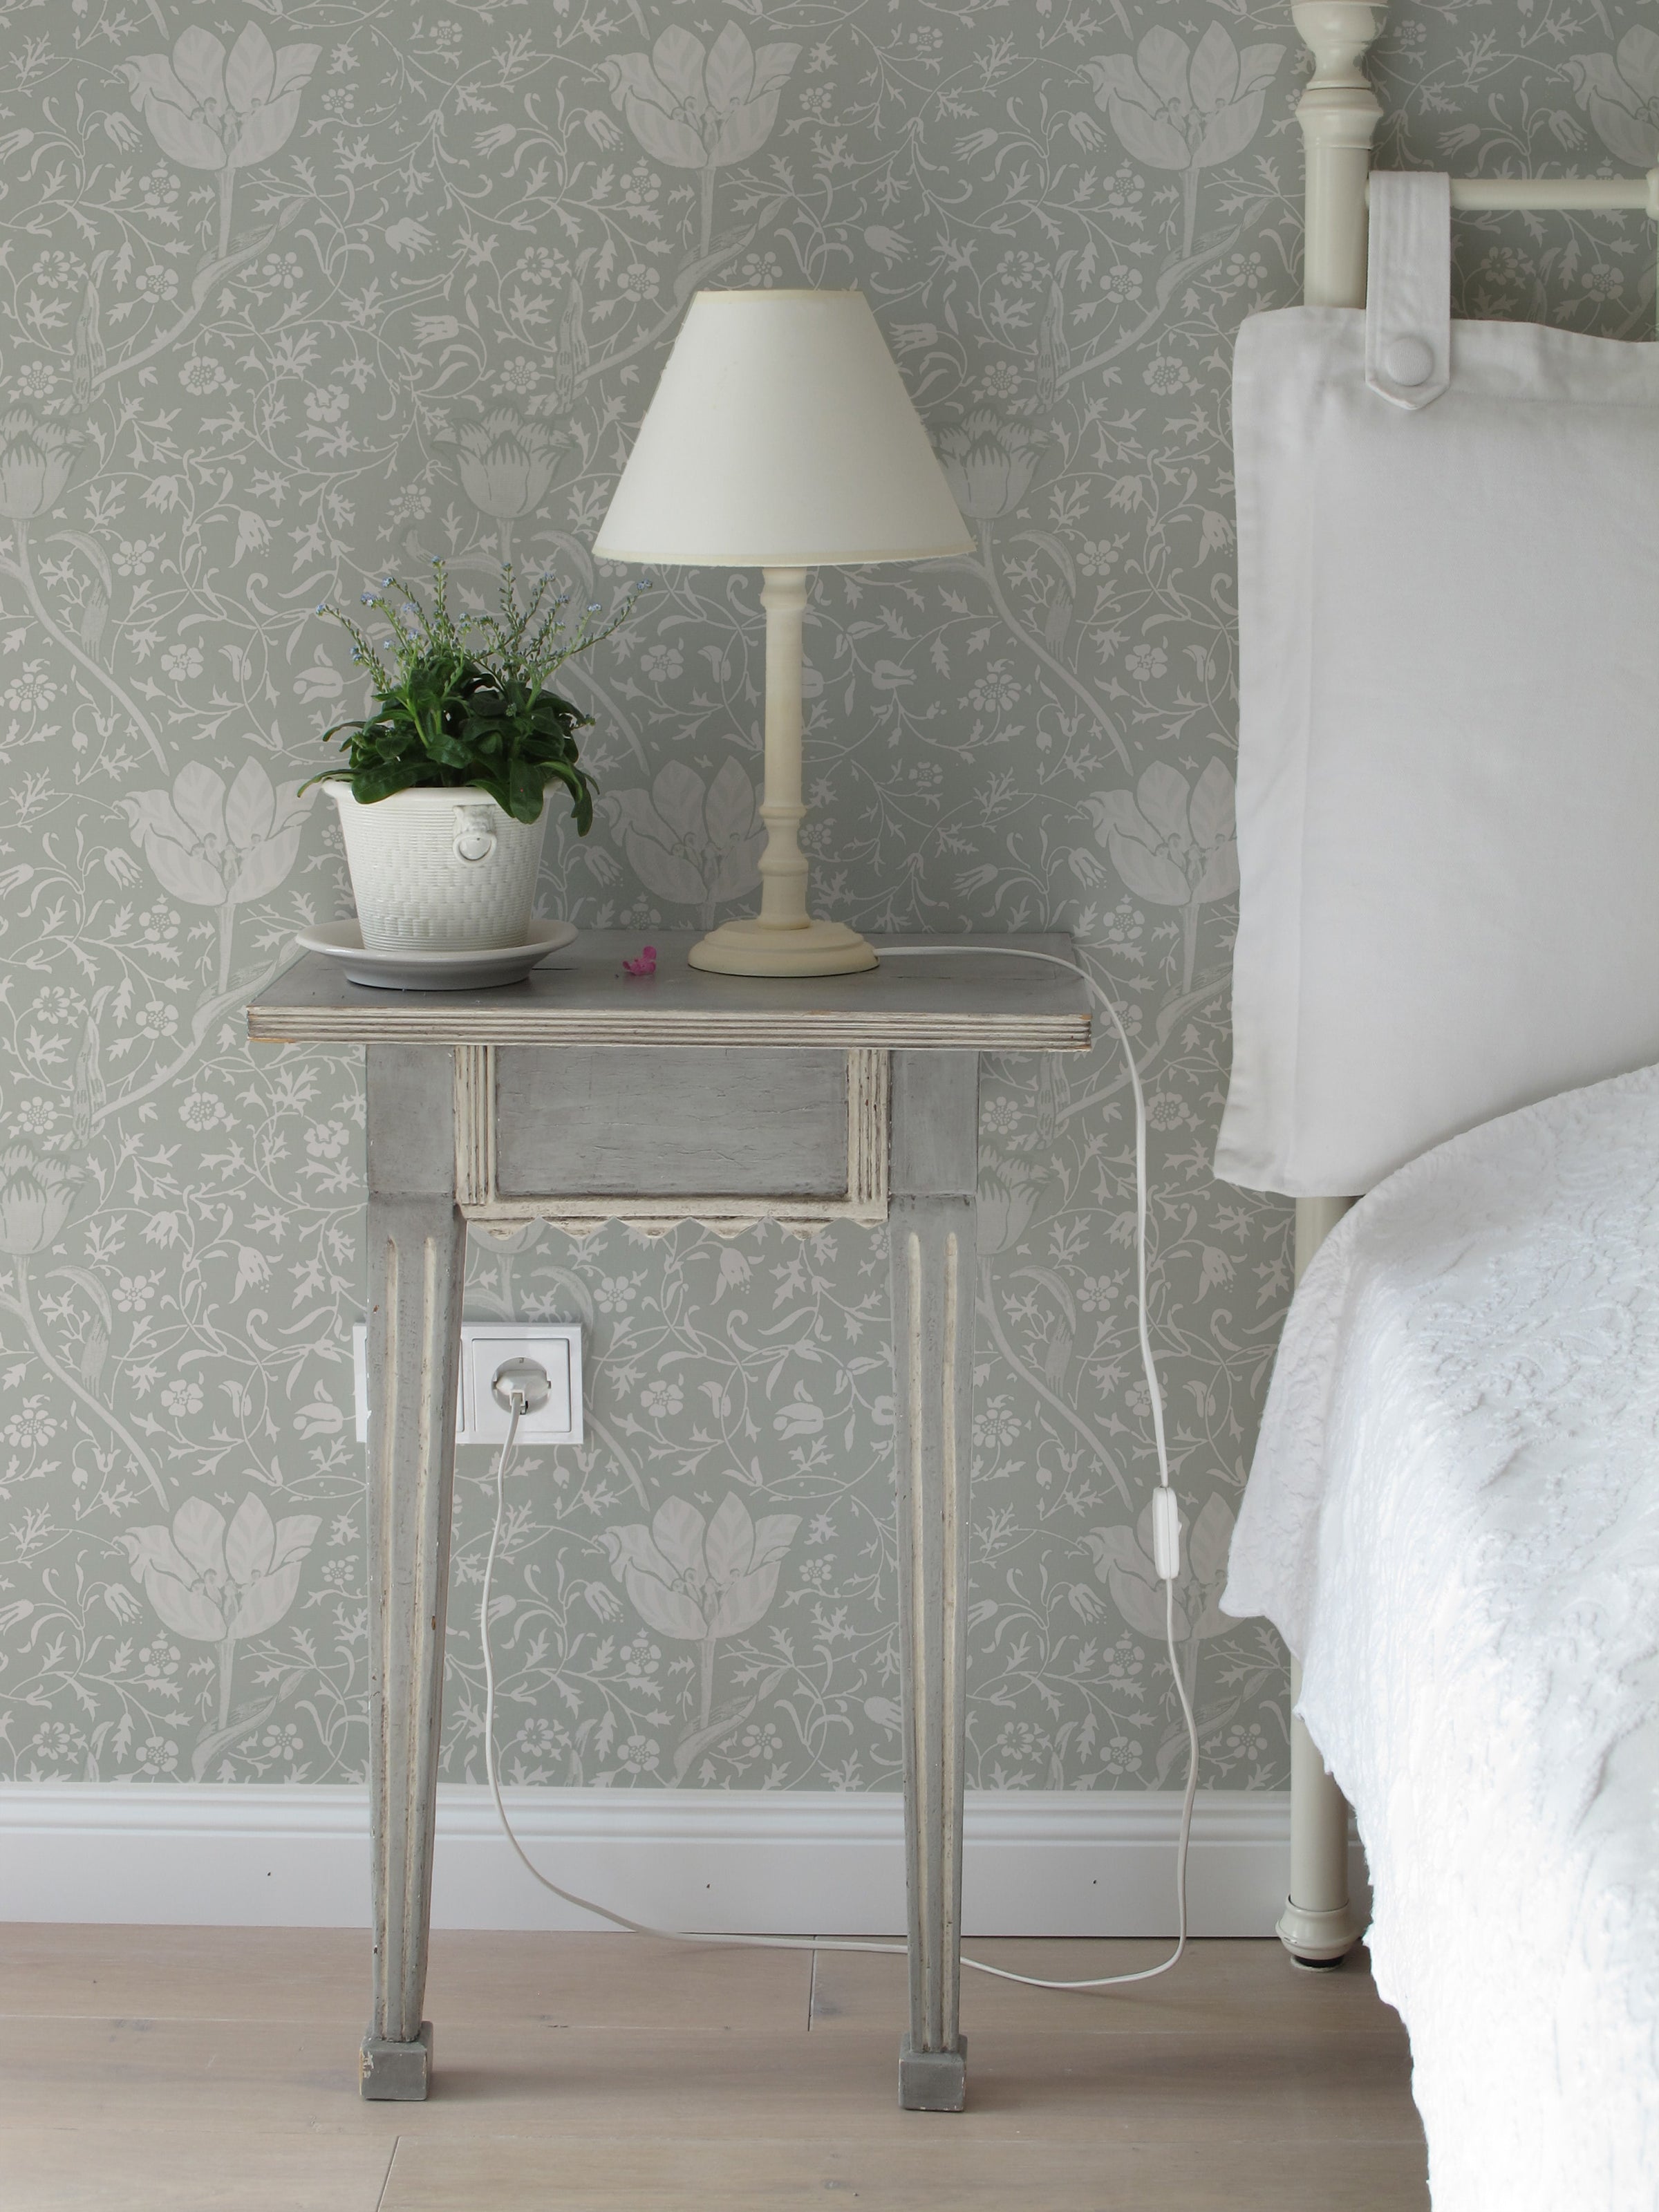 A vintage-inspired bedroom corner showcasing Fiona Floral Wallpaper in Light Sage. The wall features a detailed botanical print with large floral motifs in white over a soft sage background. A rustic wooden side table holds a classic lamp and a potted plant, enhancing the old-world charm.